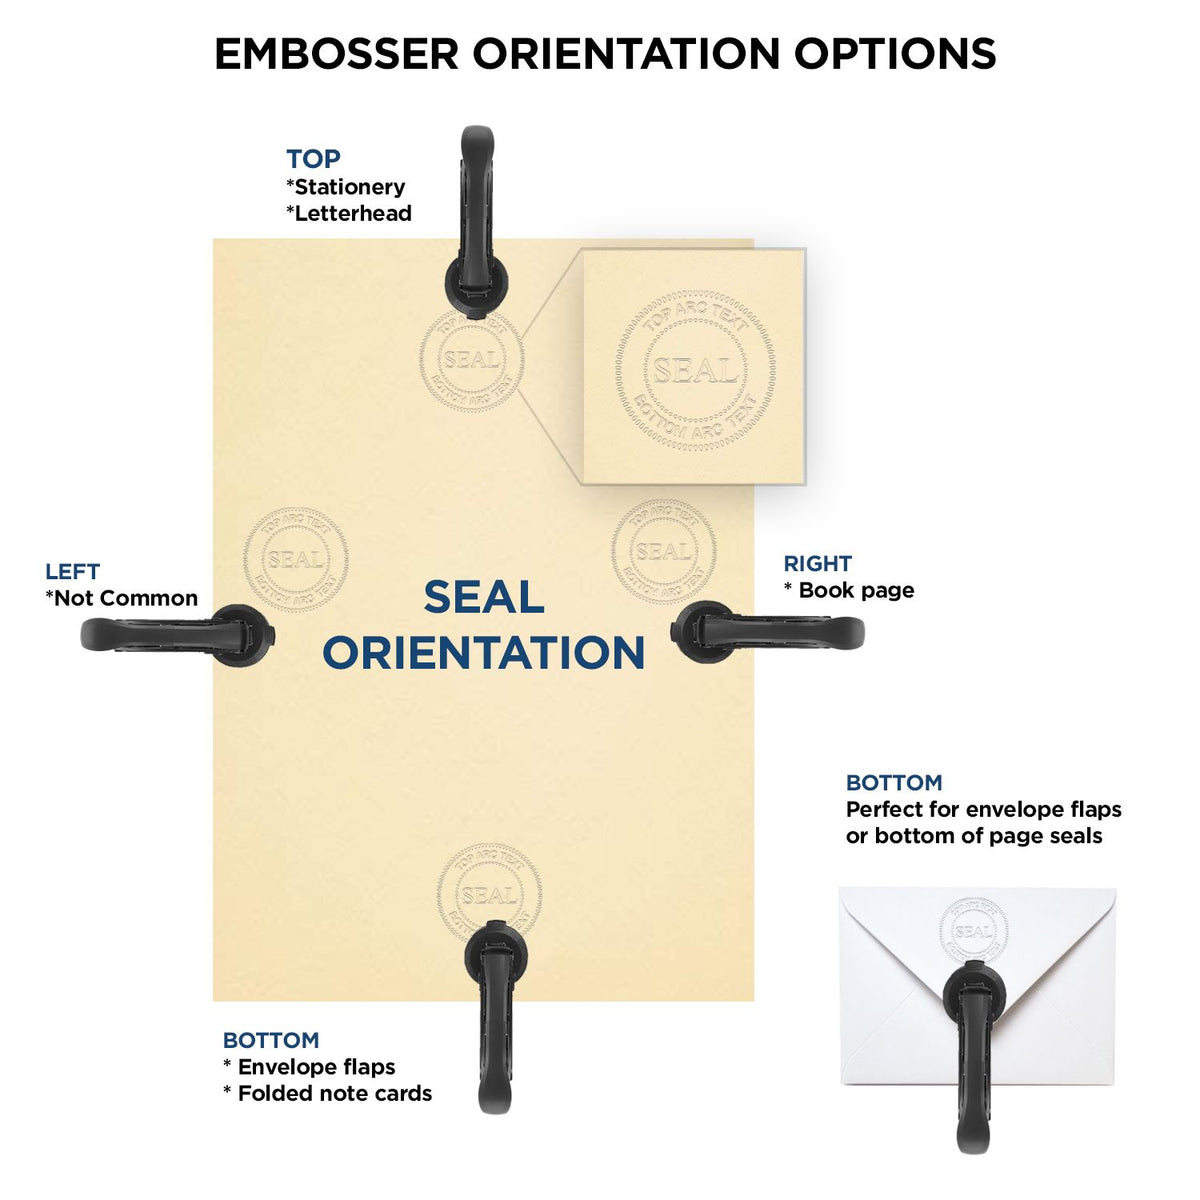 An infographic for the State of Wyoming Extended Long Reach Engineer Seal showing embosser orientation, this is showing examples of a top, bottom, right and left insert.